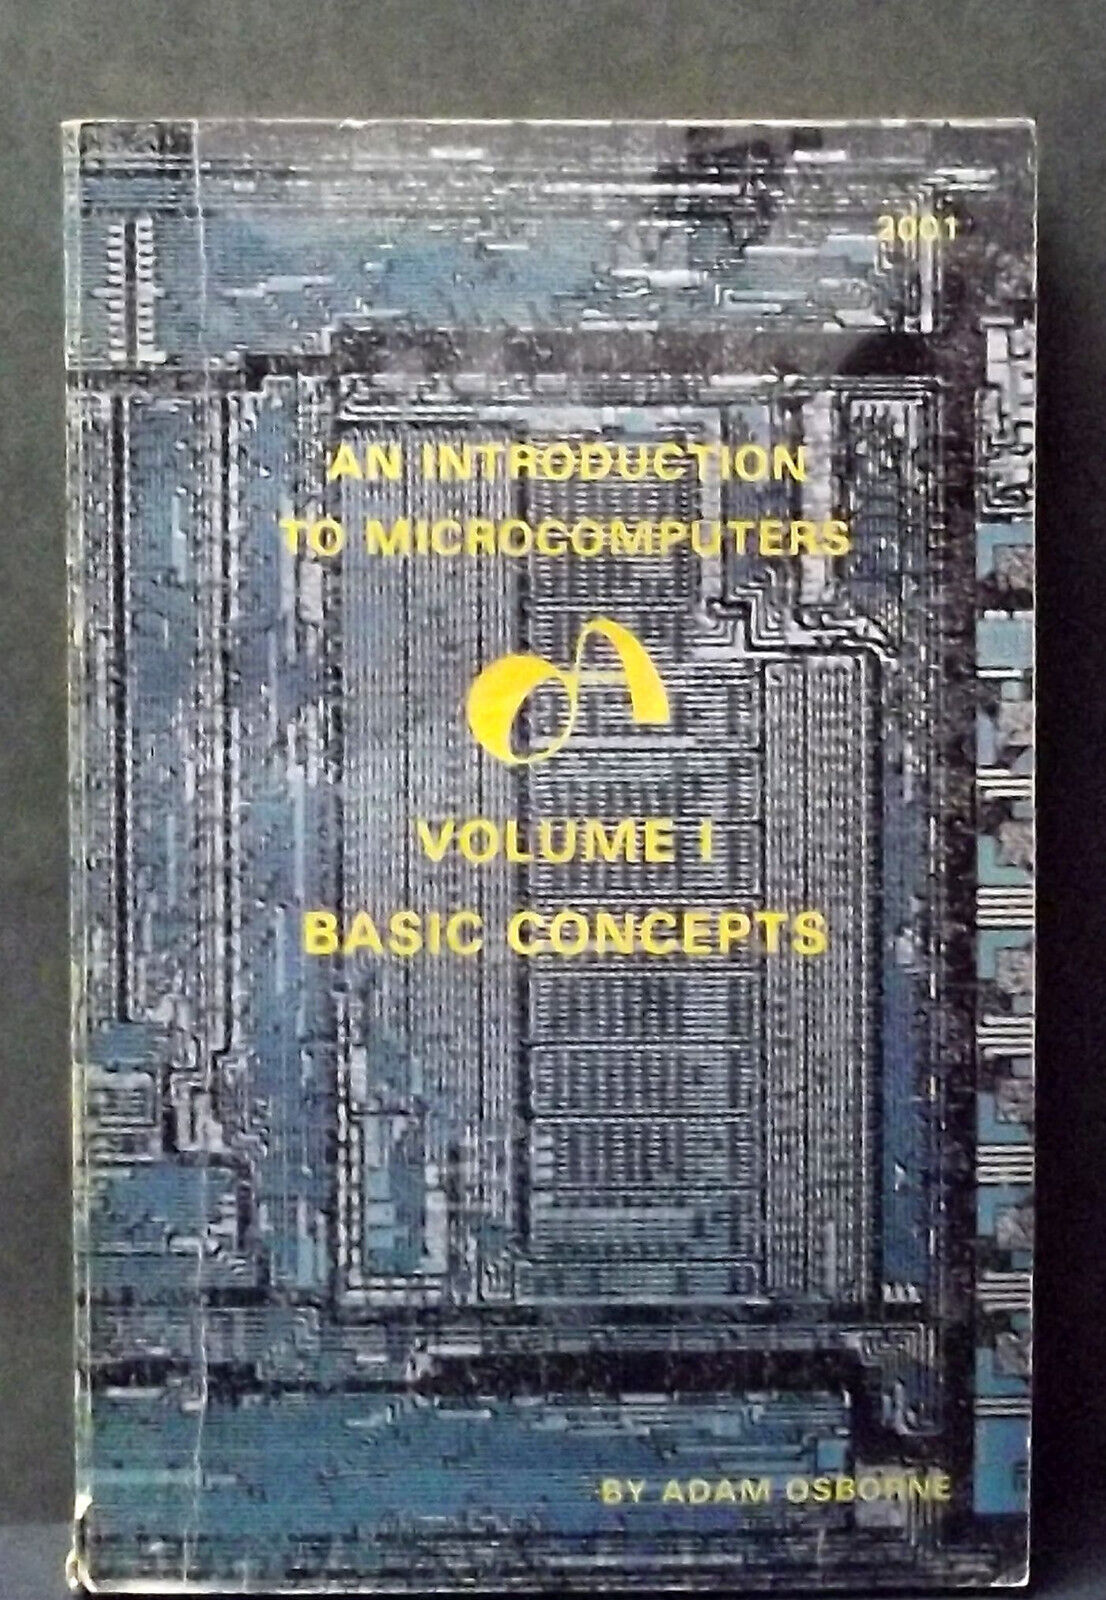 AN INTRODUCTION TO MICROCOMPUTERS VOLUME I AND II by ADAM OSBORNE